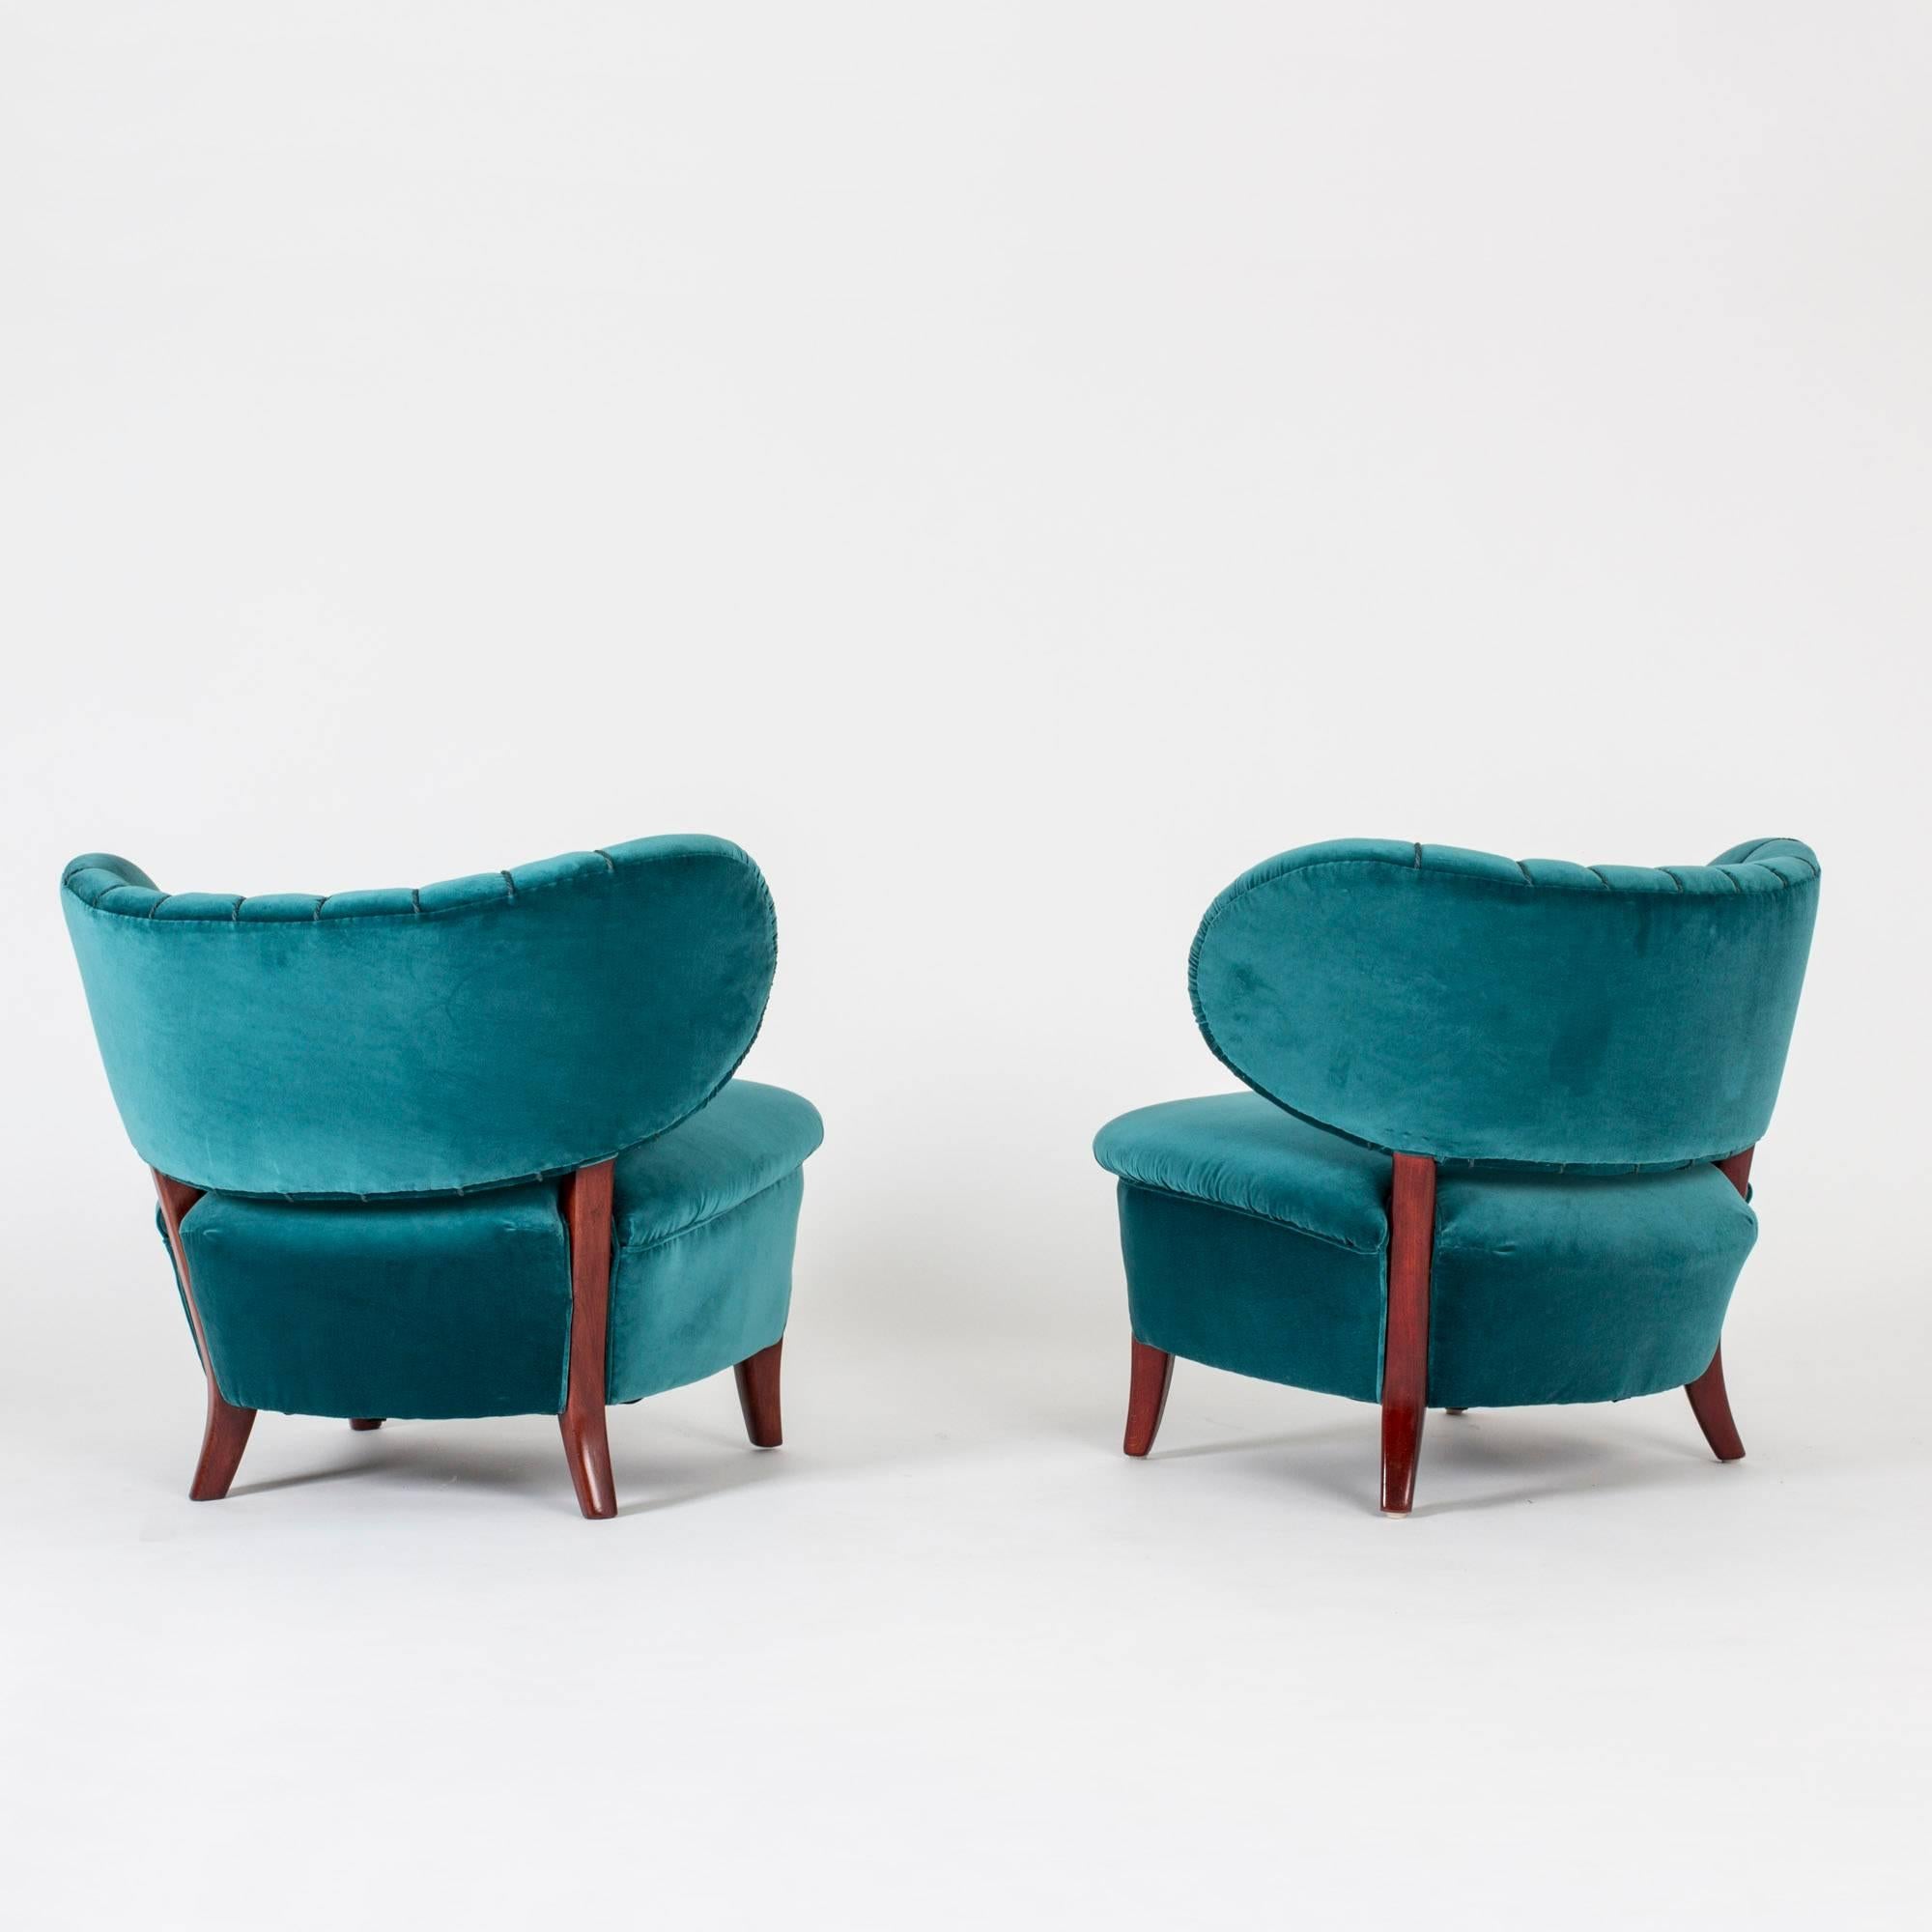 Scandinavian Modern Pair of Lounge Chairs by Otto Schulz